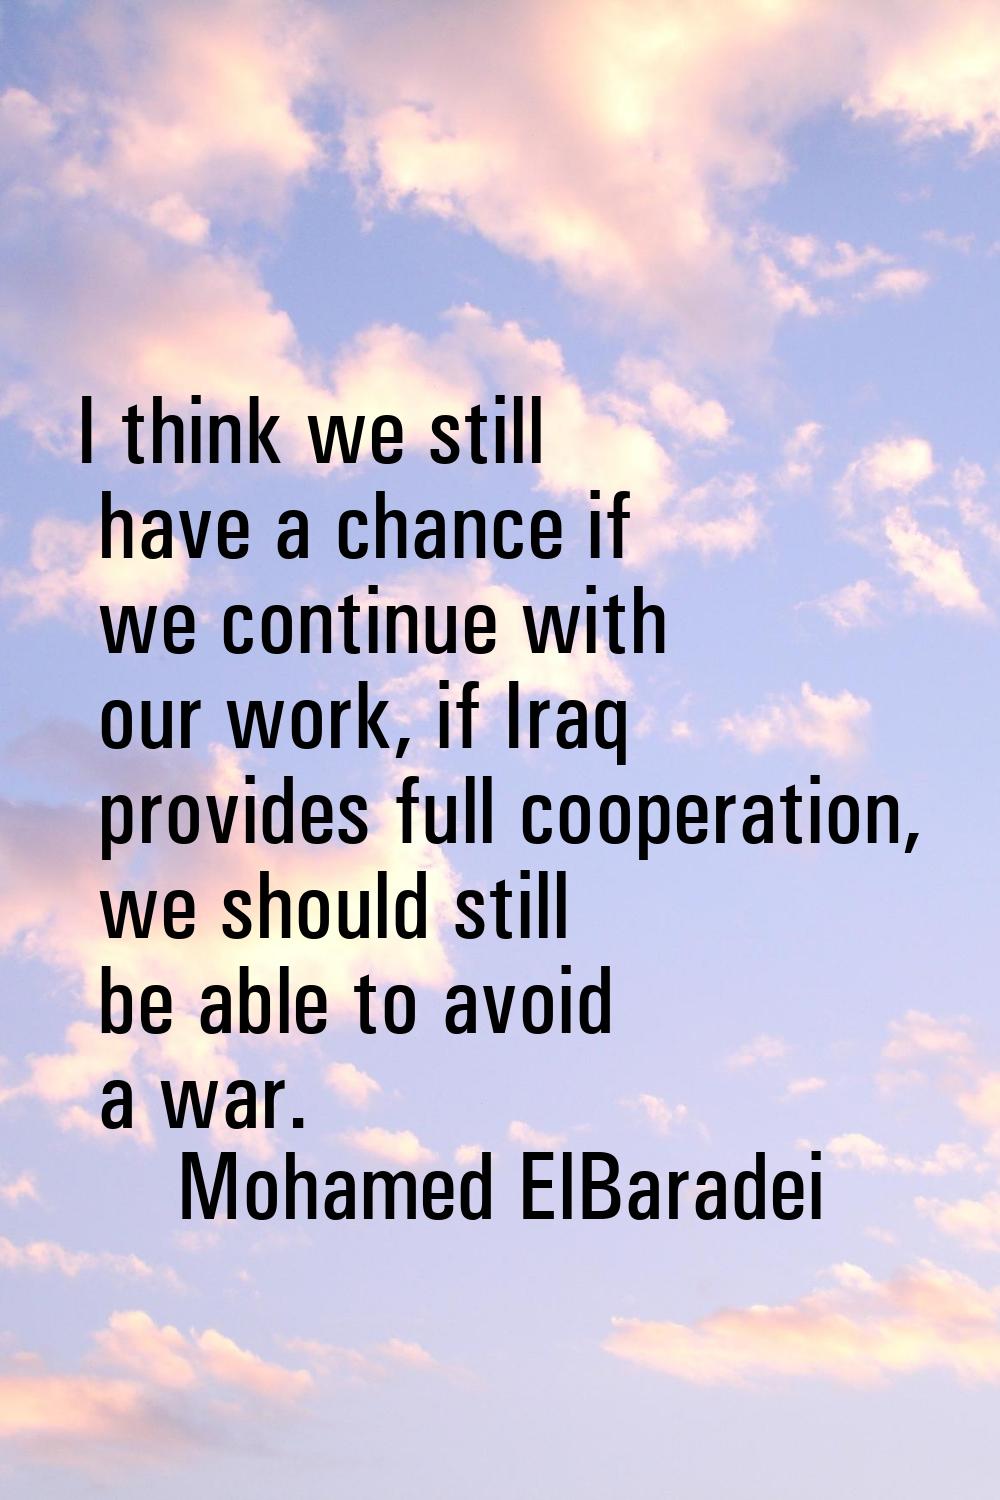 I think we still have a chance if we continue with our work, if Iraq provides full cooperation, we 